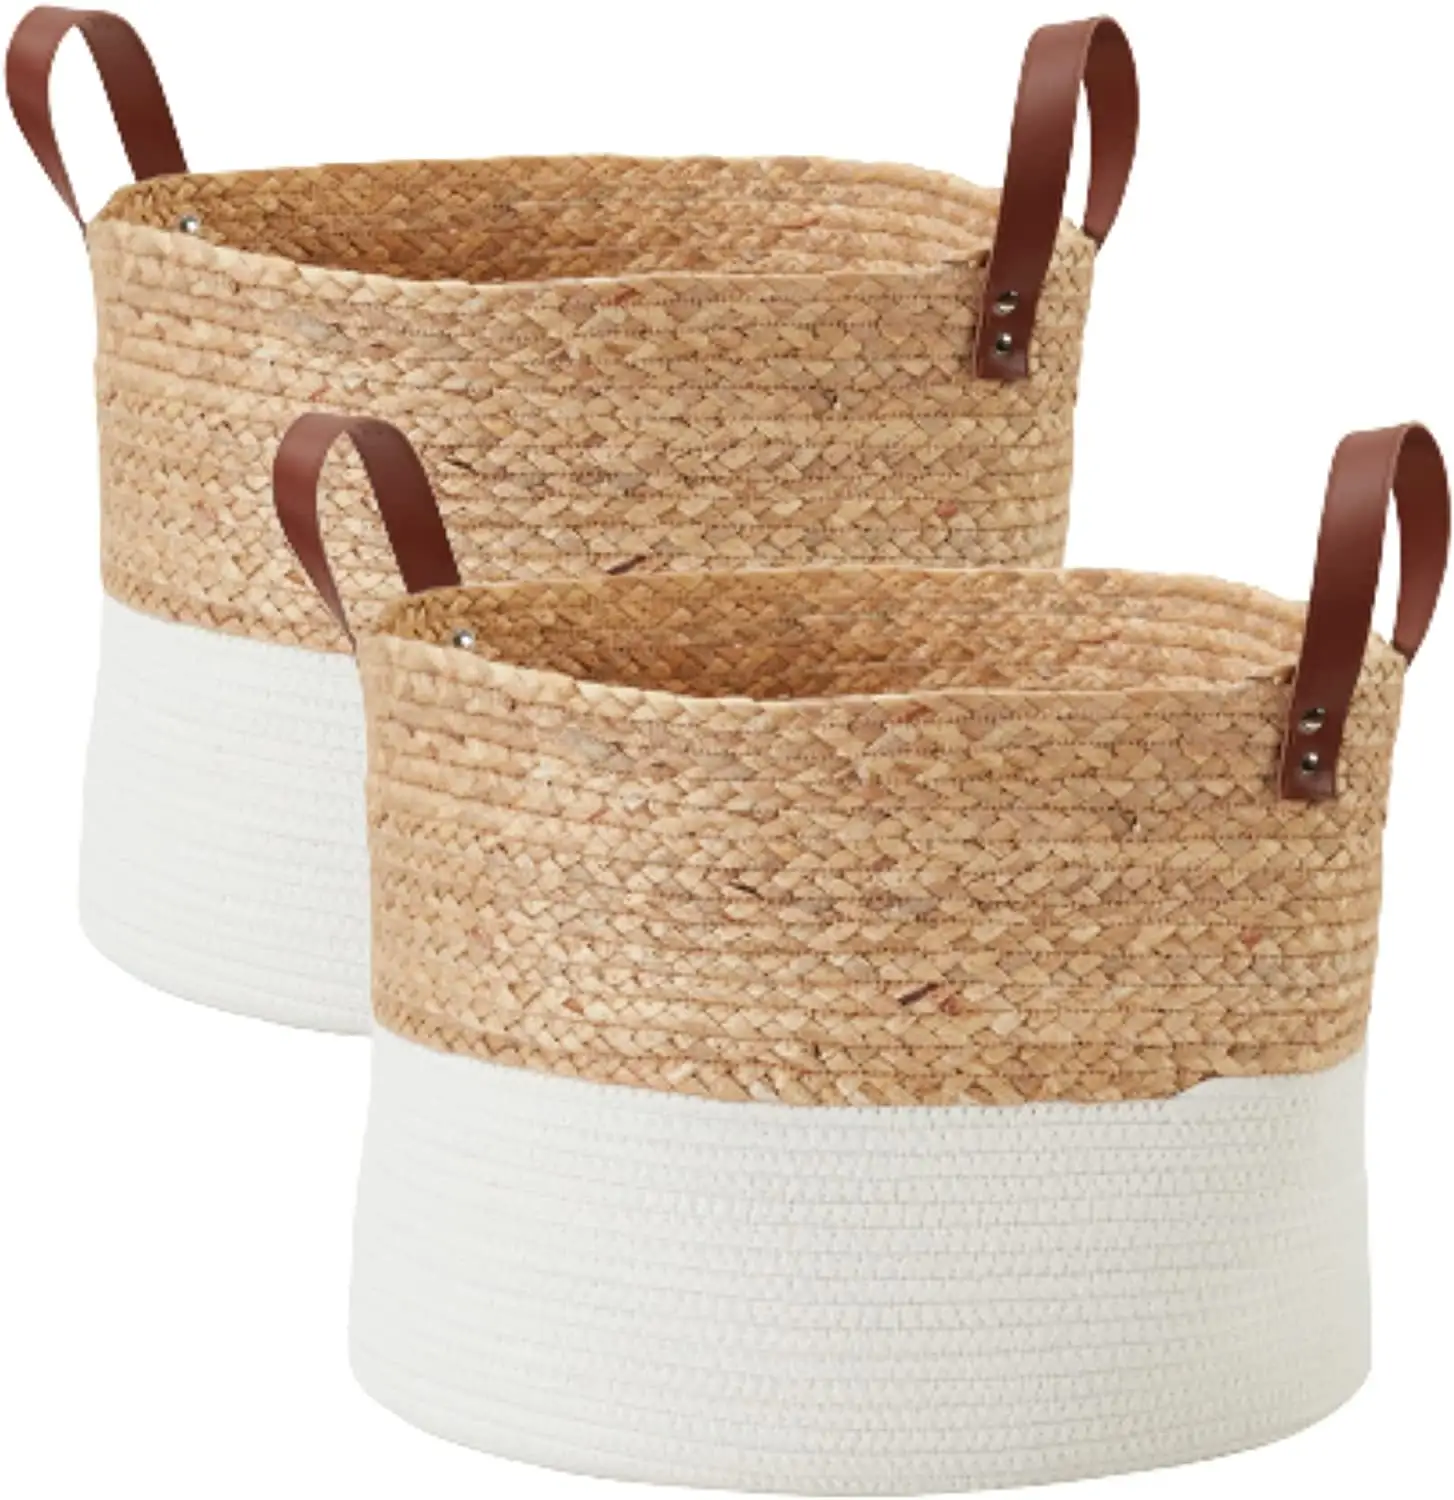 Hot sale Foldable Home Organizer WovenSeagrass Cotton Rope Hamper Clothes Storage Laundry Basket with Handle Straw weaving